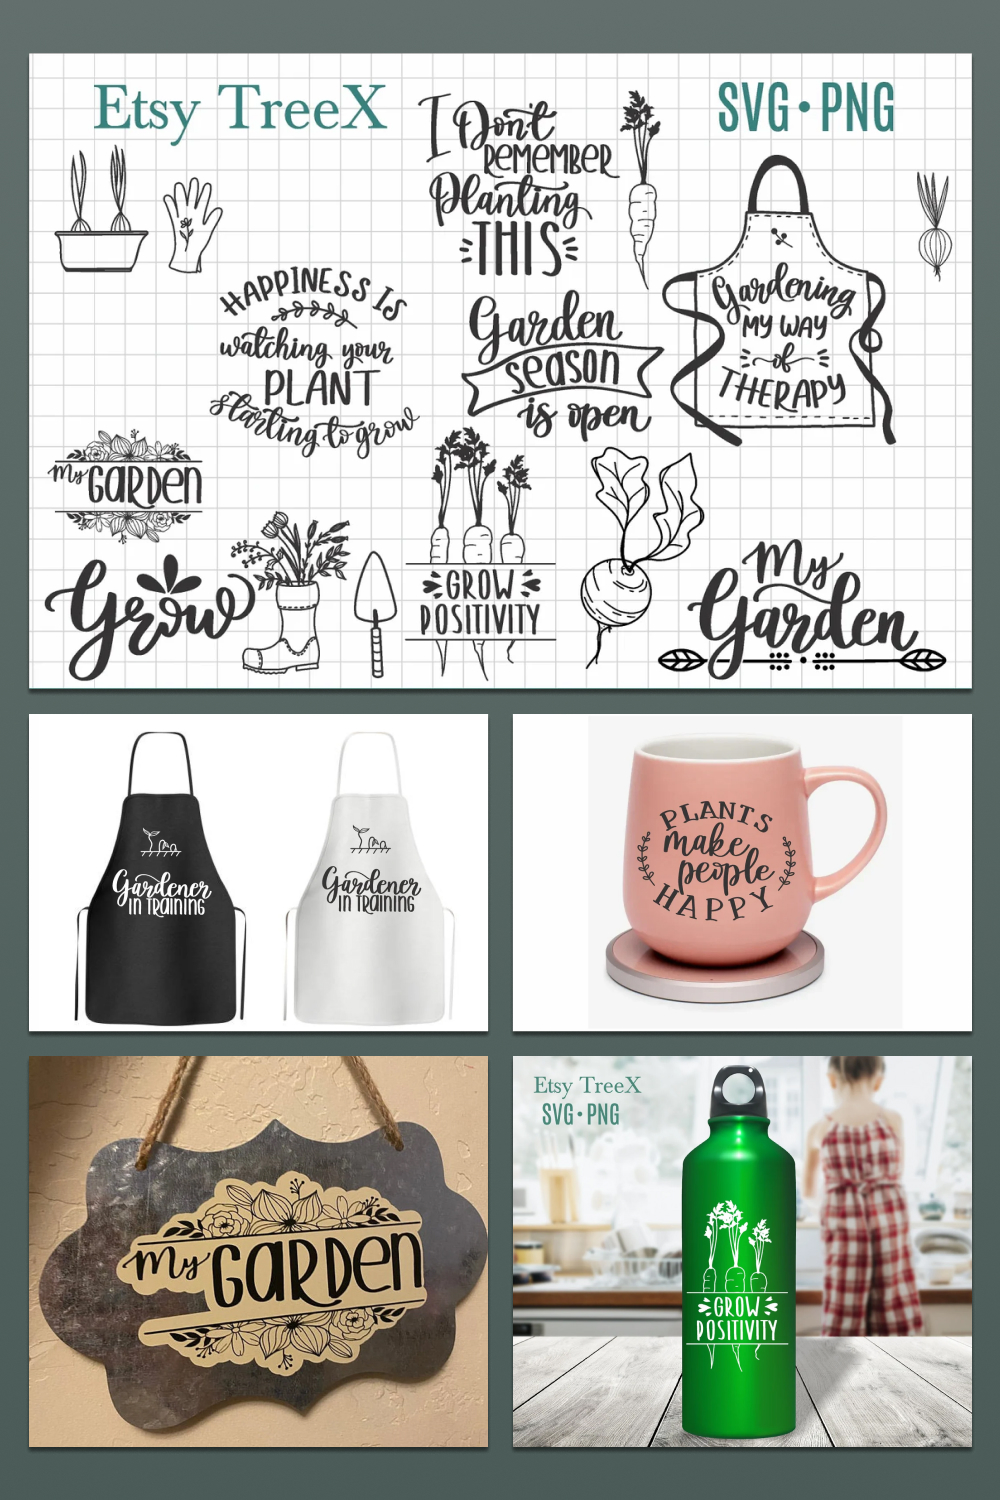 Images of prints on aprons, cups, plates, etc.